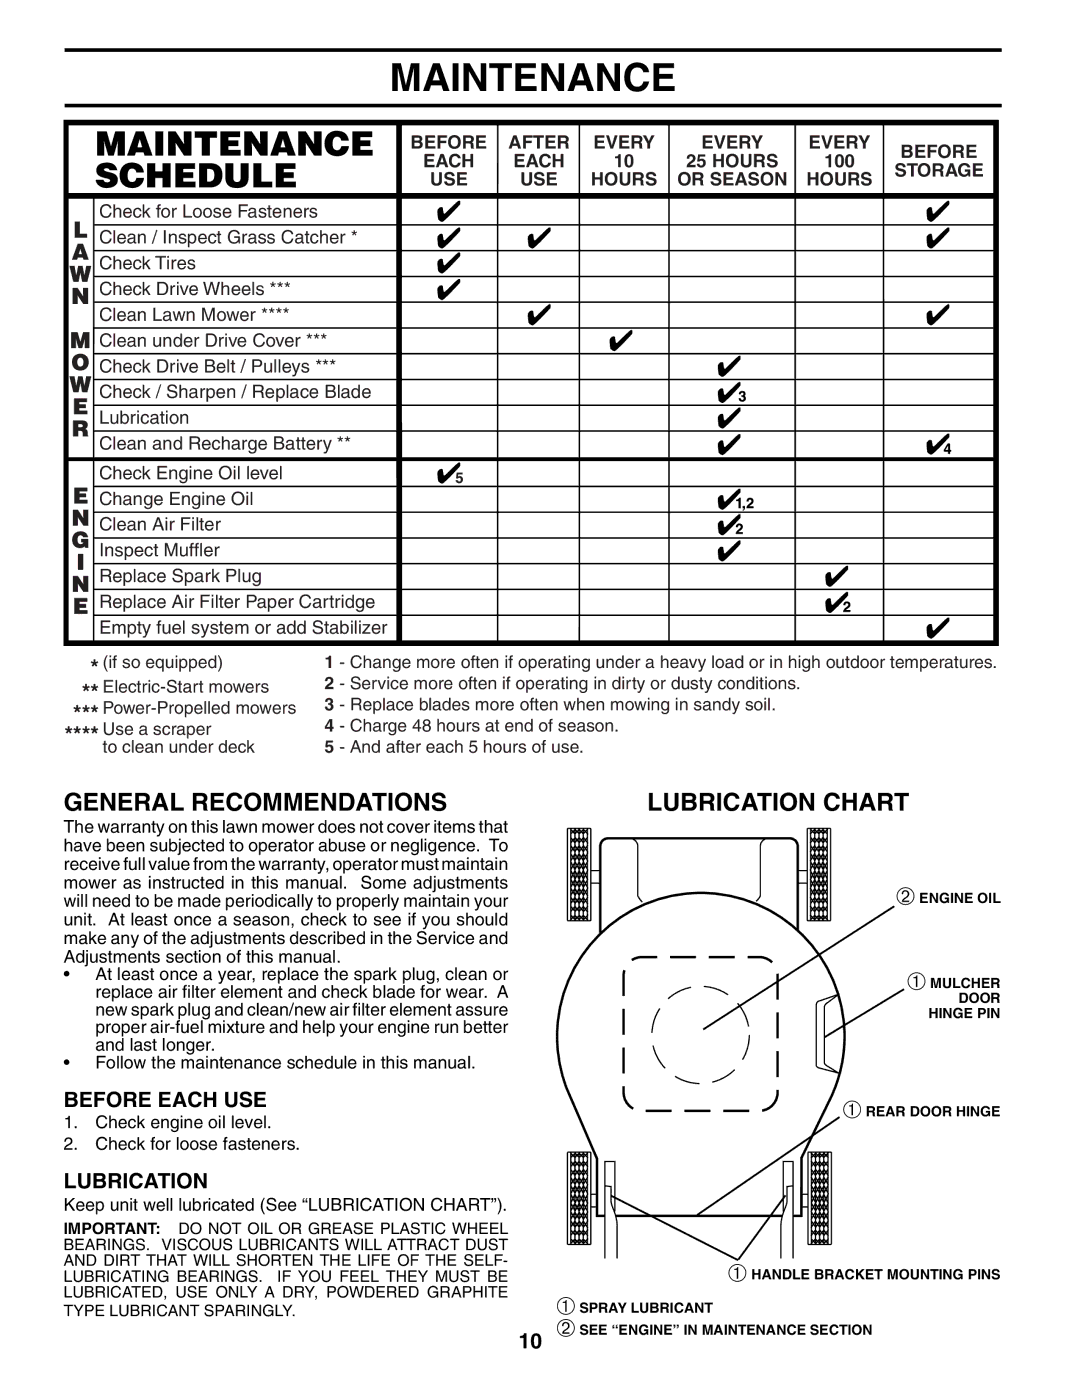 Husqvarna 5521RSX owner manual Maintenance, General Recommendations, Lubrication Chart, Before Each USE 